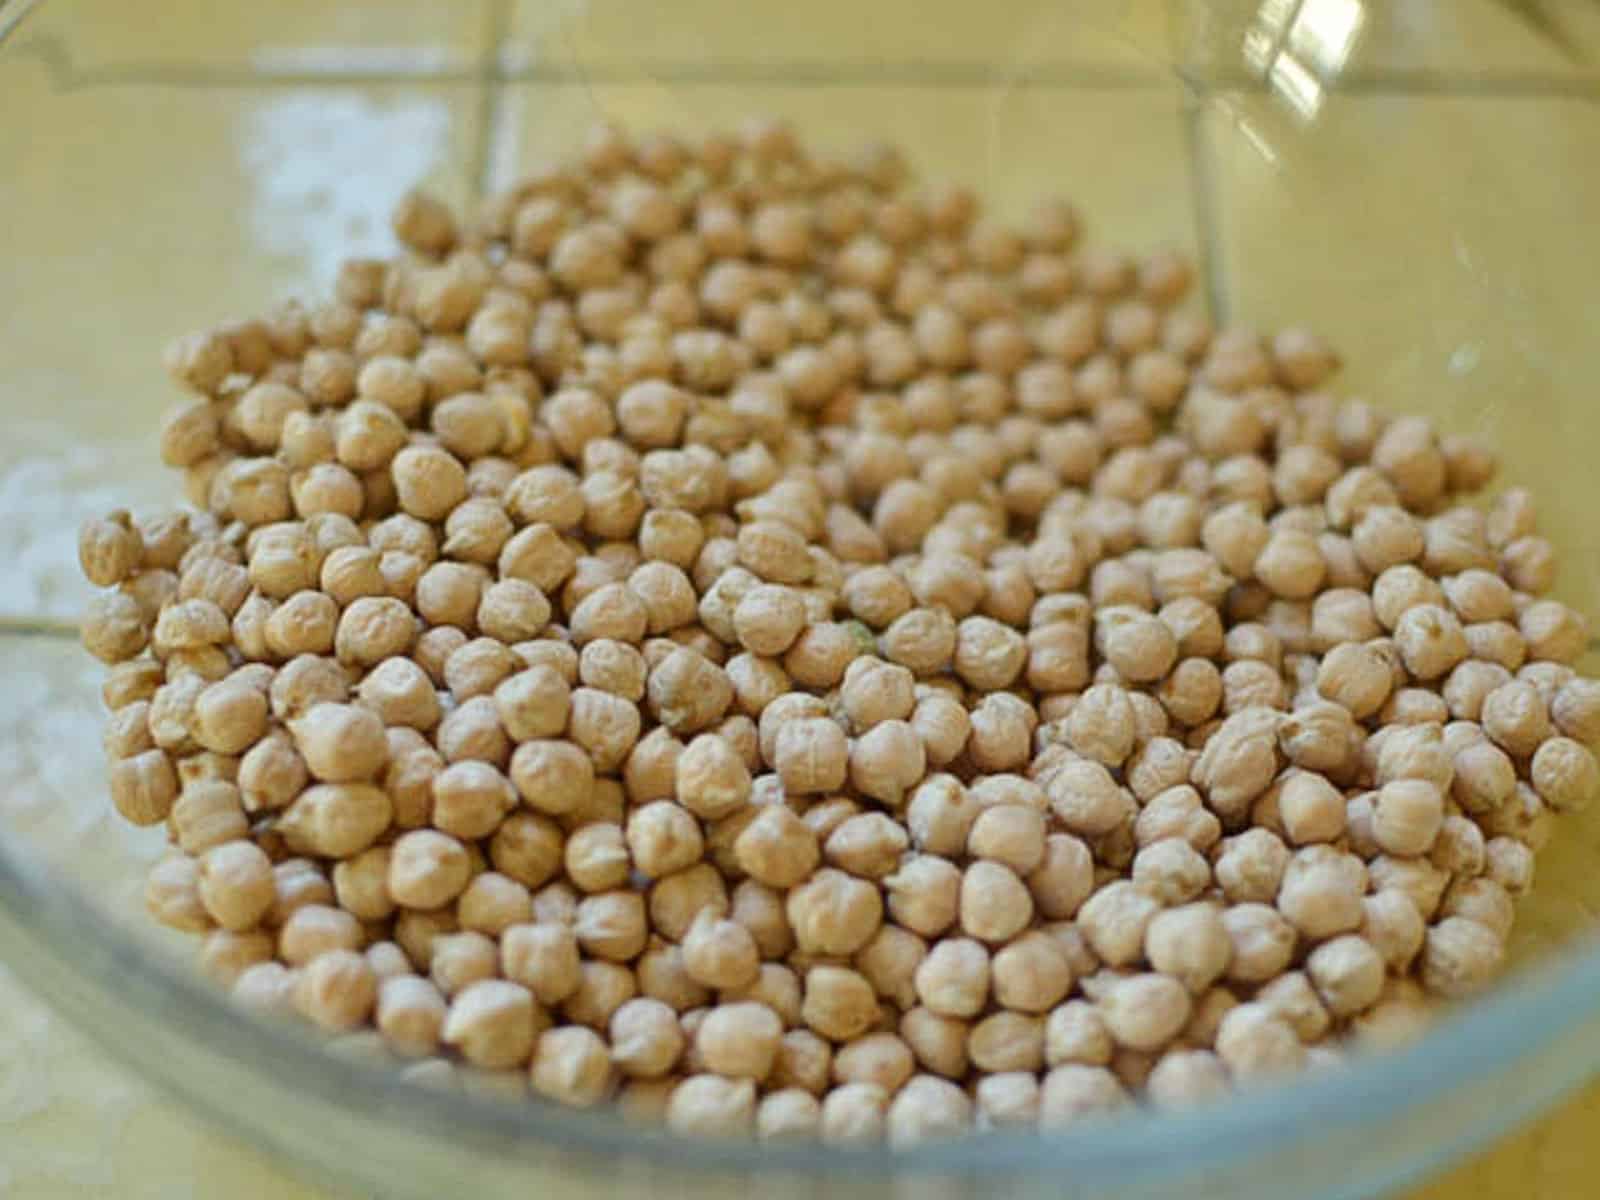 Add dried chickpeas to a large bowl and fill with water, completely covering the chickpeas. 